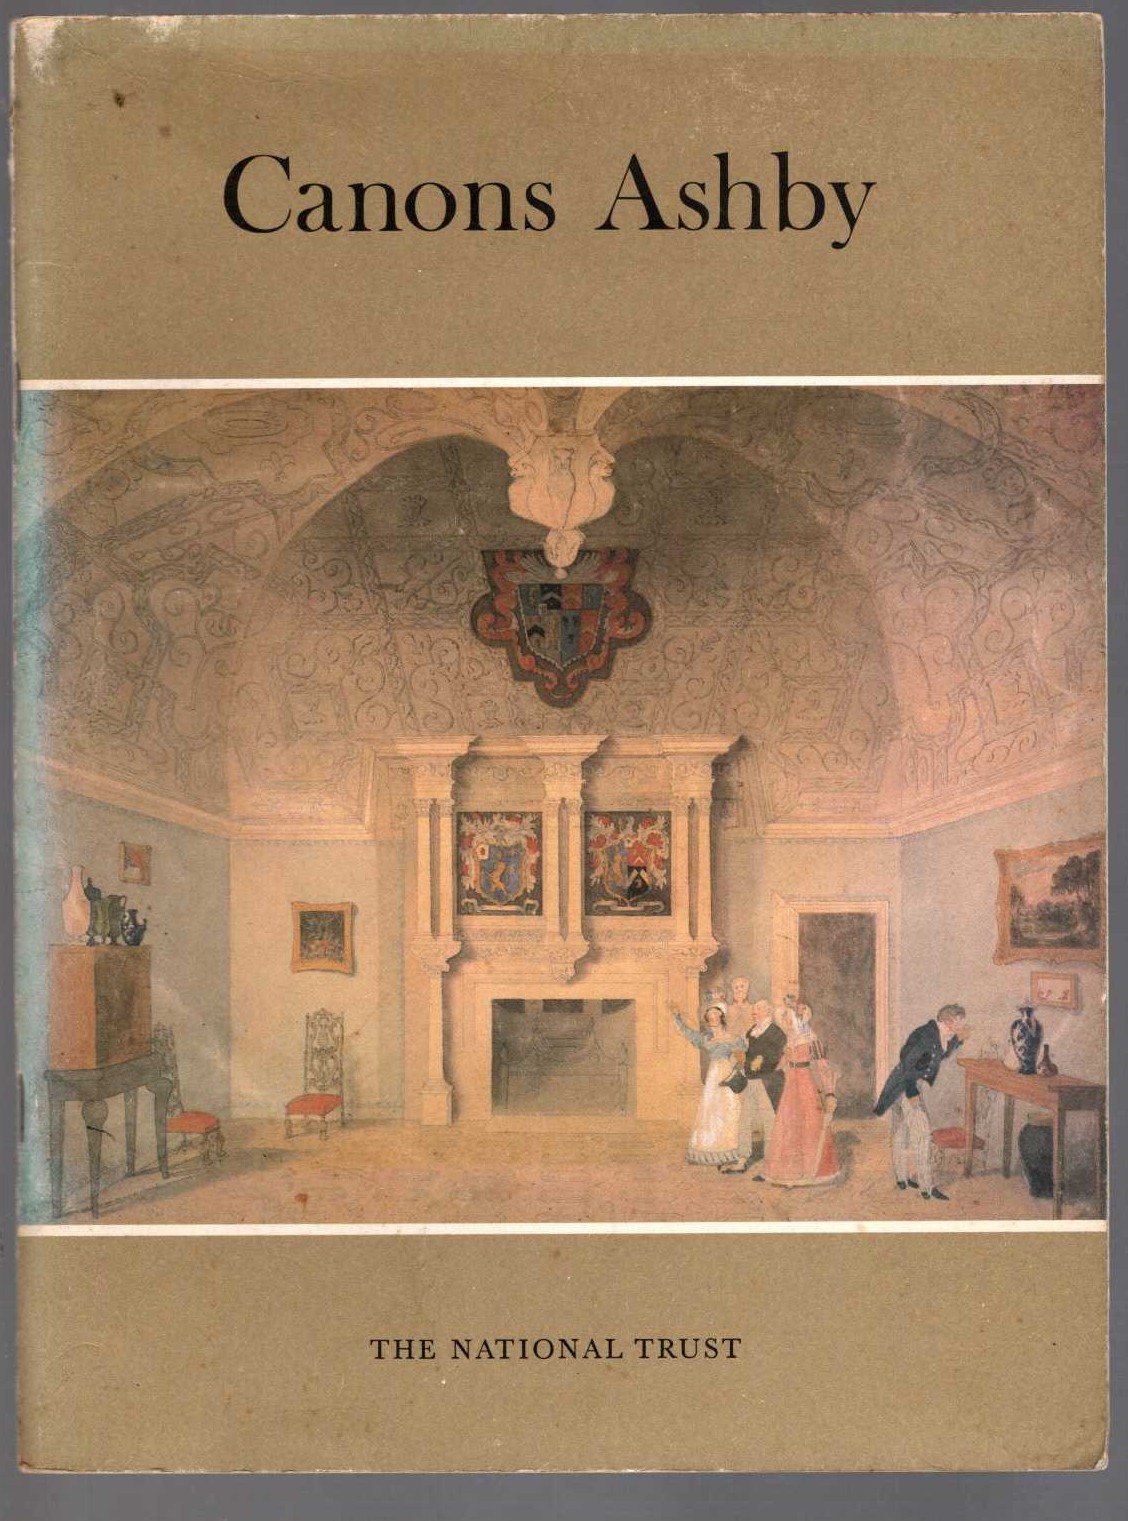 
\ CANONS ASHBY by The National Trust front book cover image